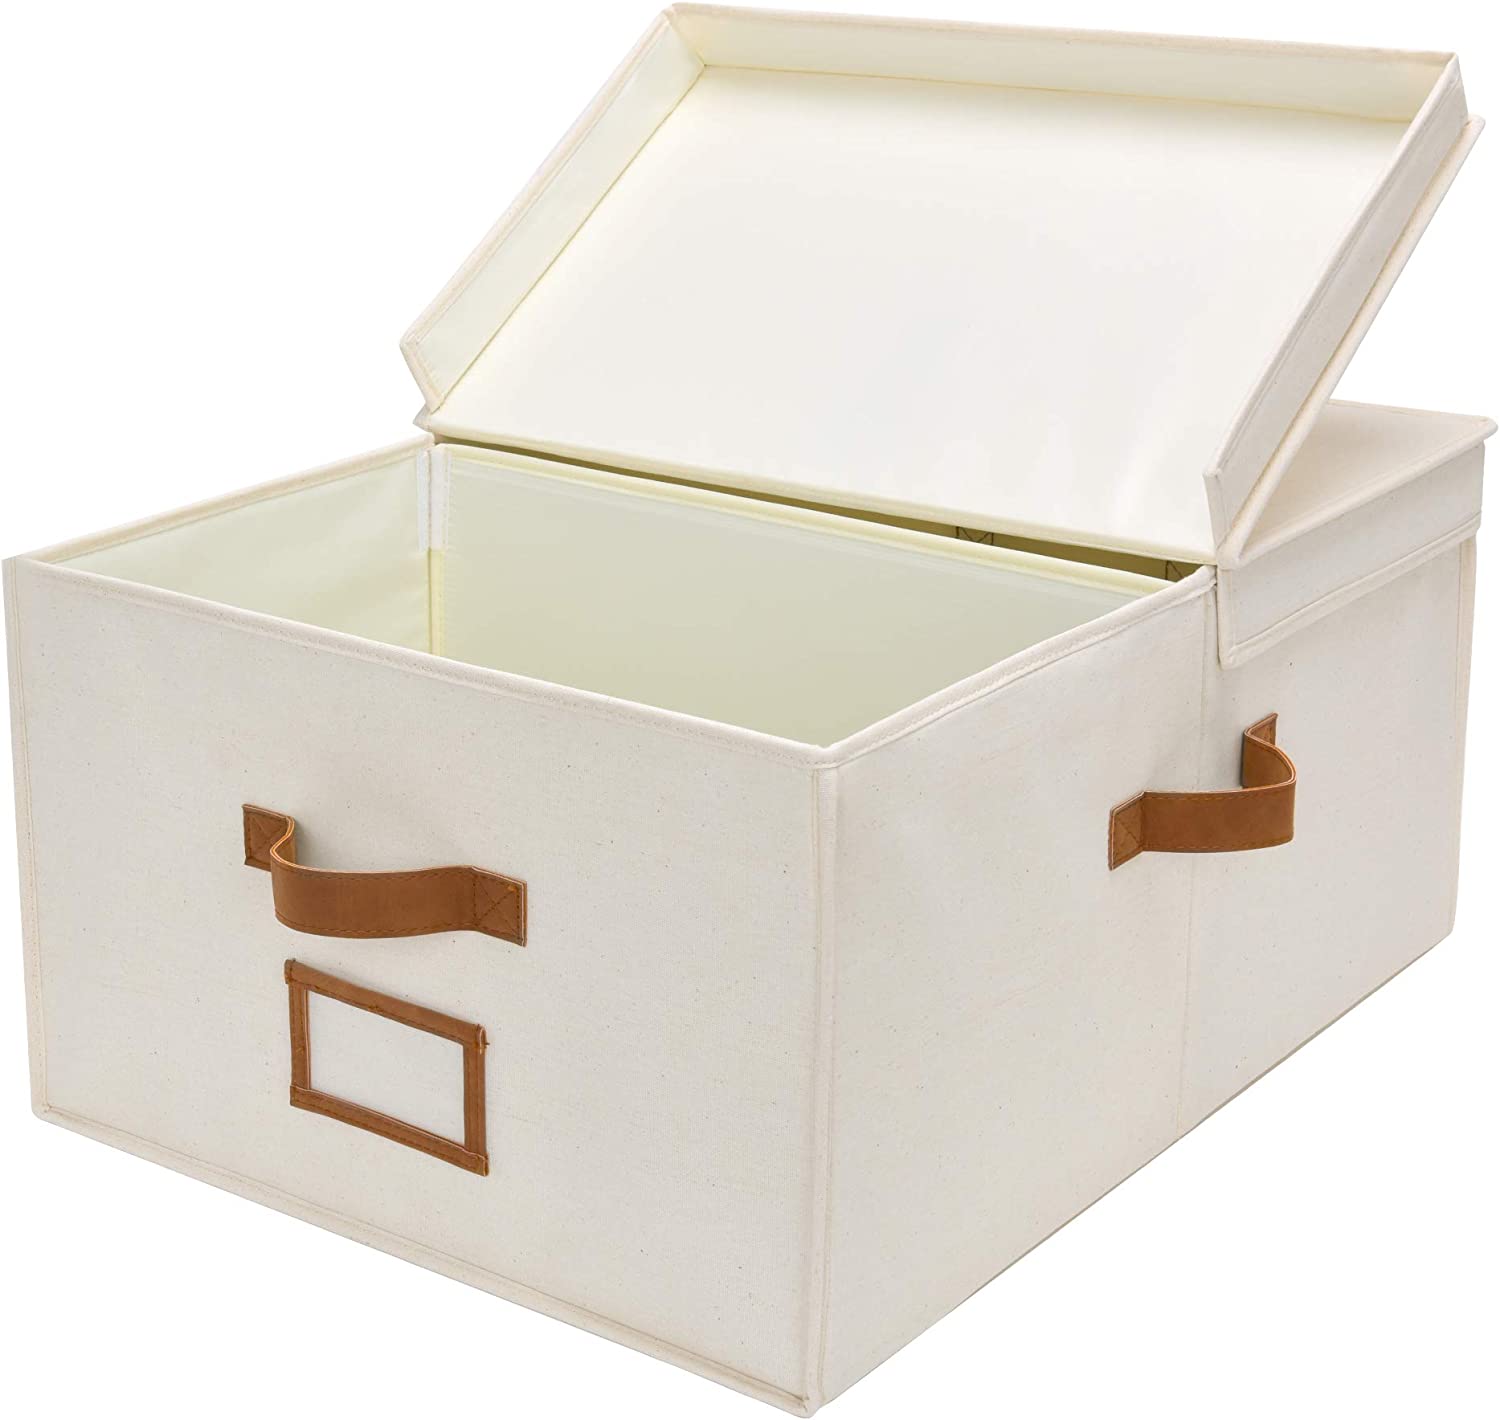 5-Wter-proof-fabric-storeages-box-with-lids